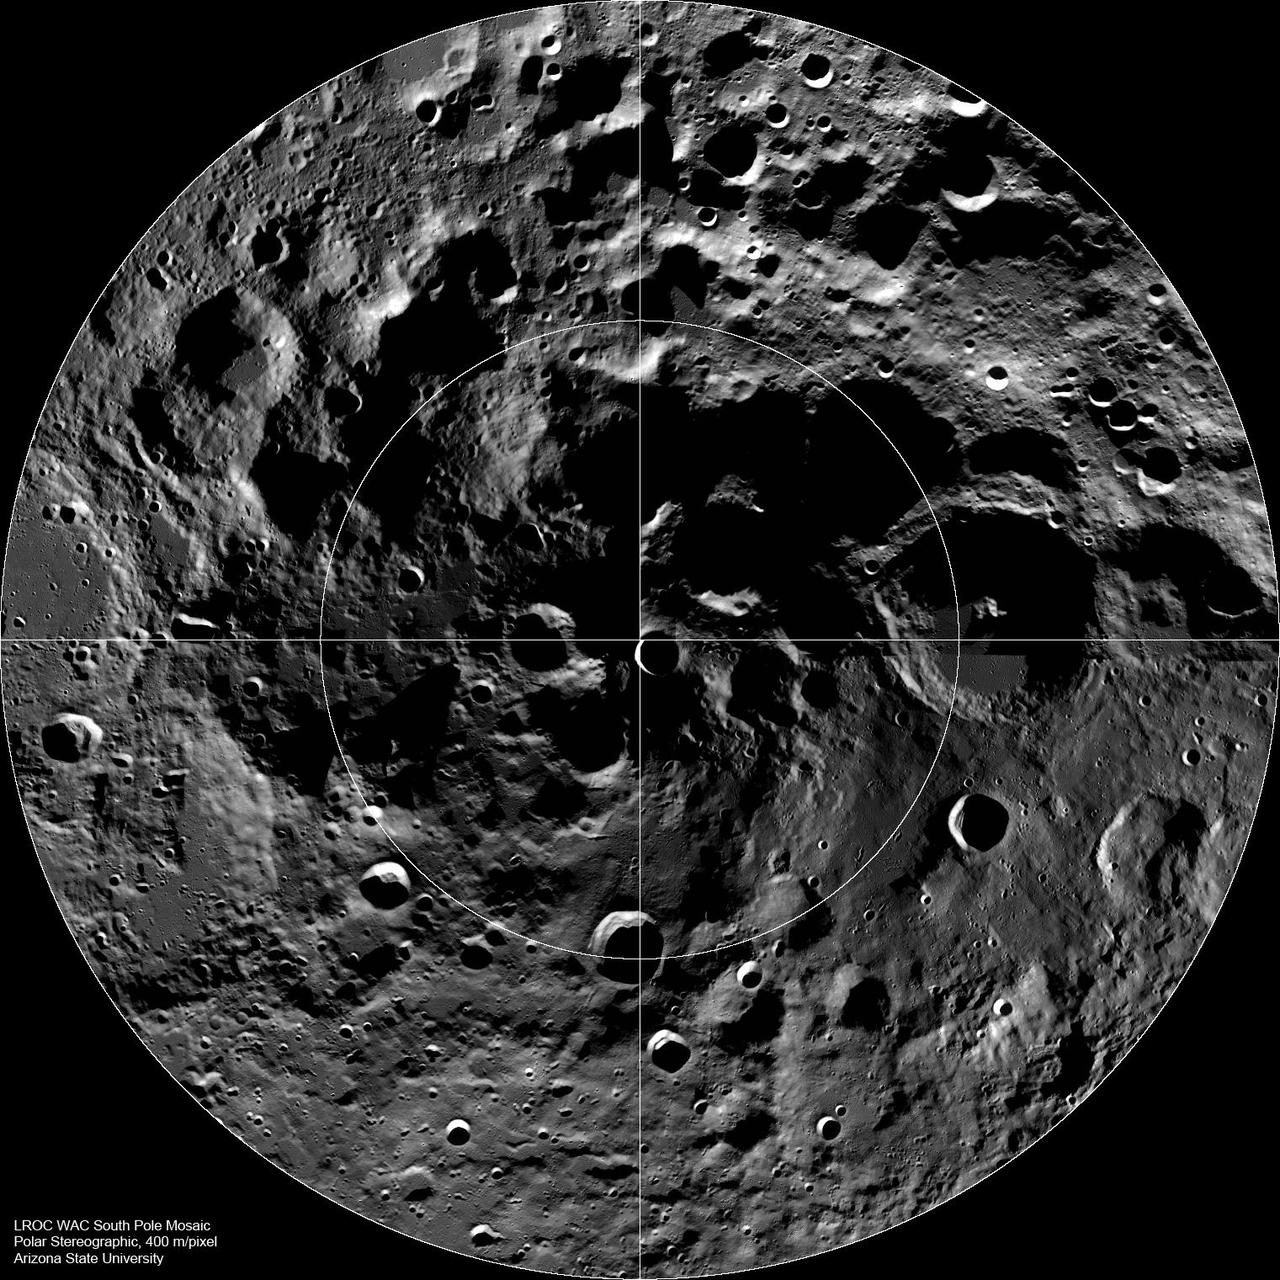 A view of the lunar south pole, where newly confirmed carbon dioxide cold traps are located, according to new research in Geophysical Research Letters. Future missions on the Moon may target this region to find out more about the resources that may exist there.
Credit: NASA/GSFC/Arizona State University